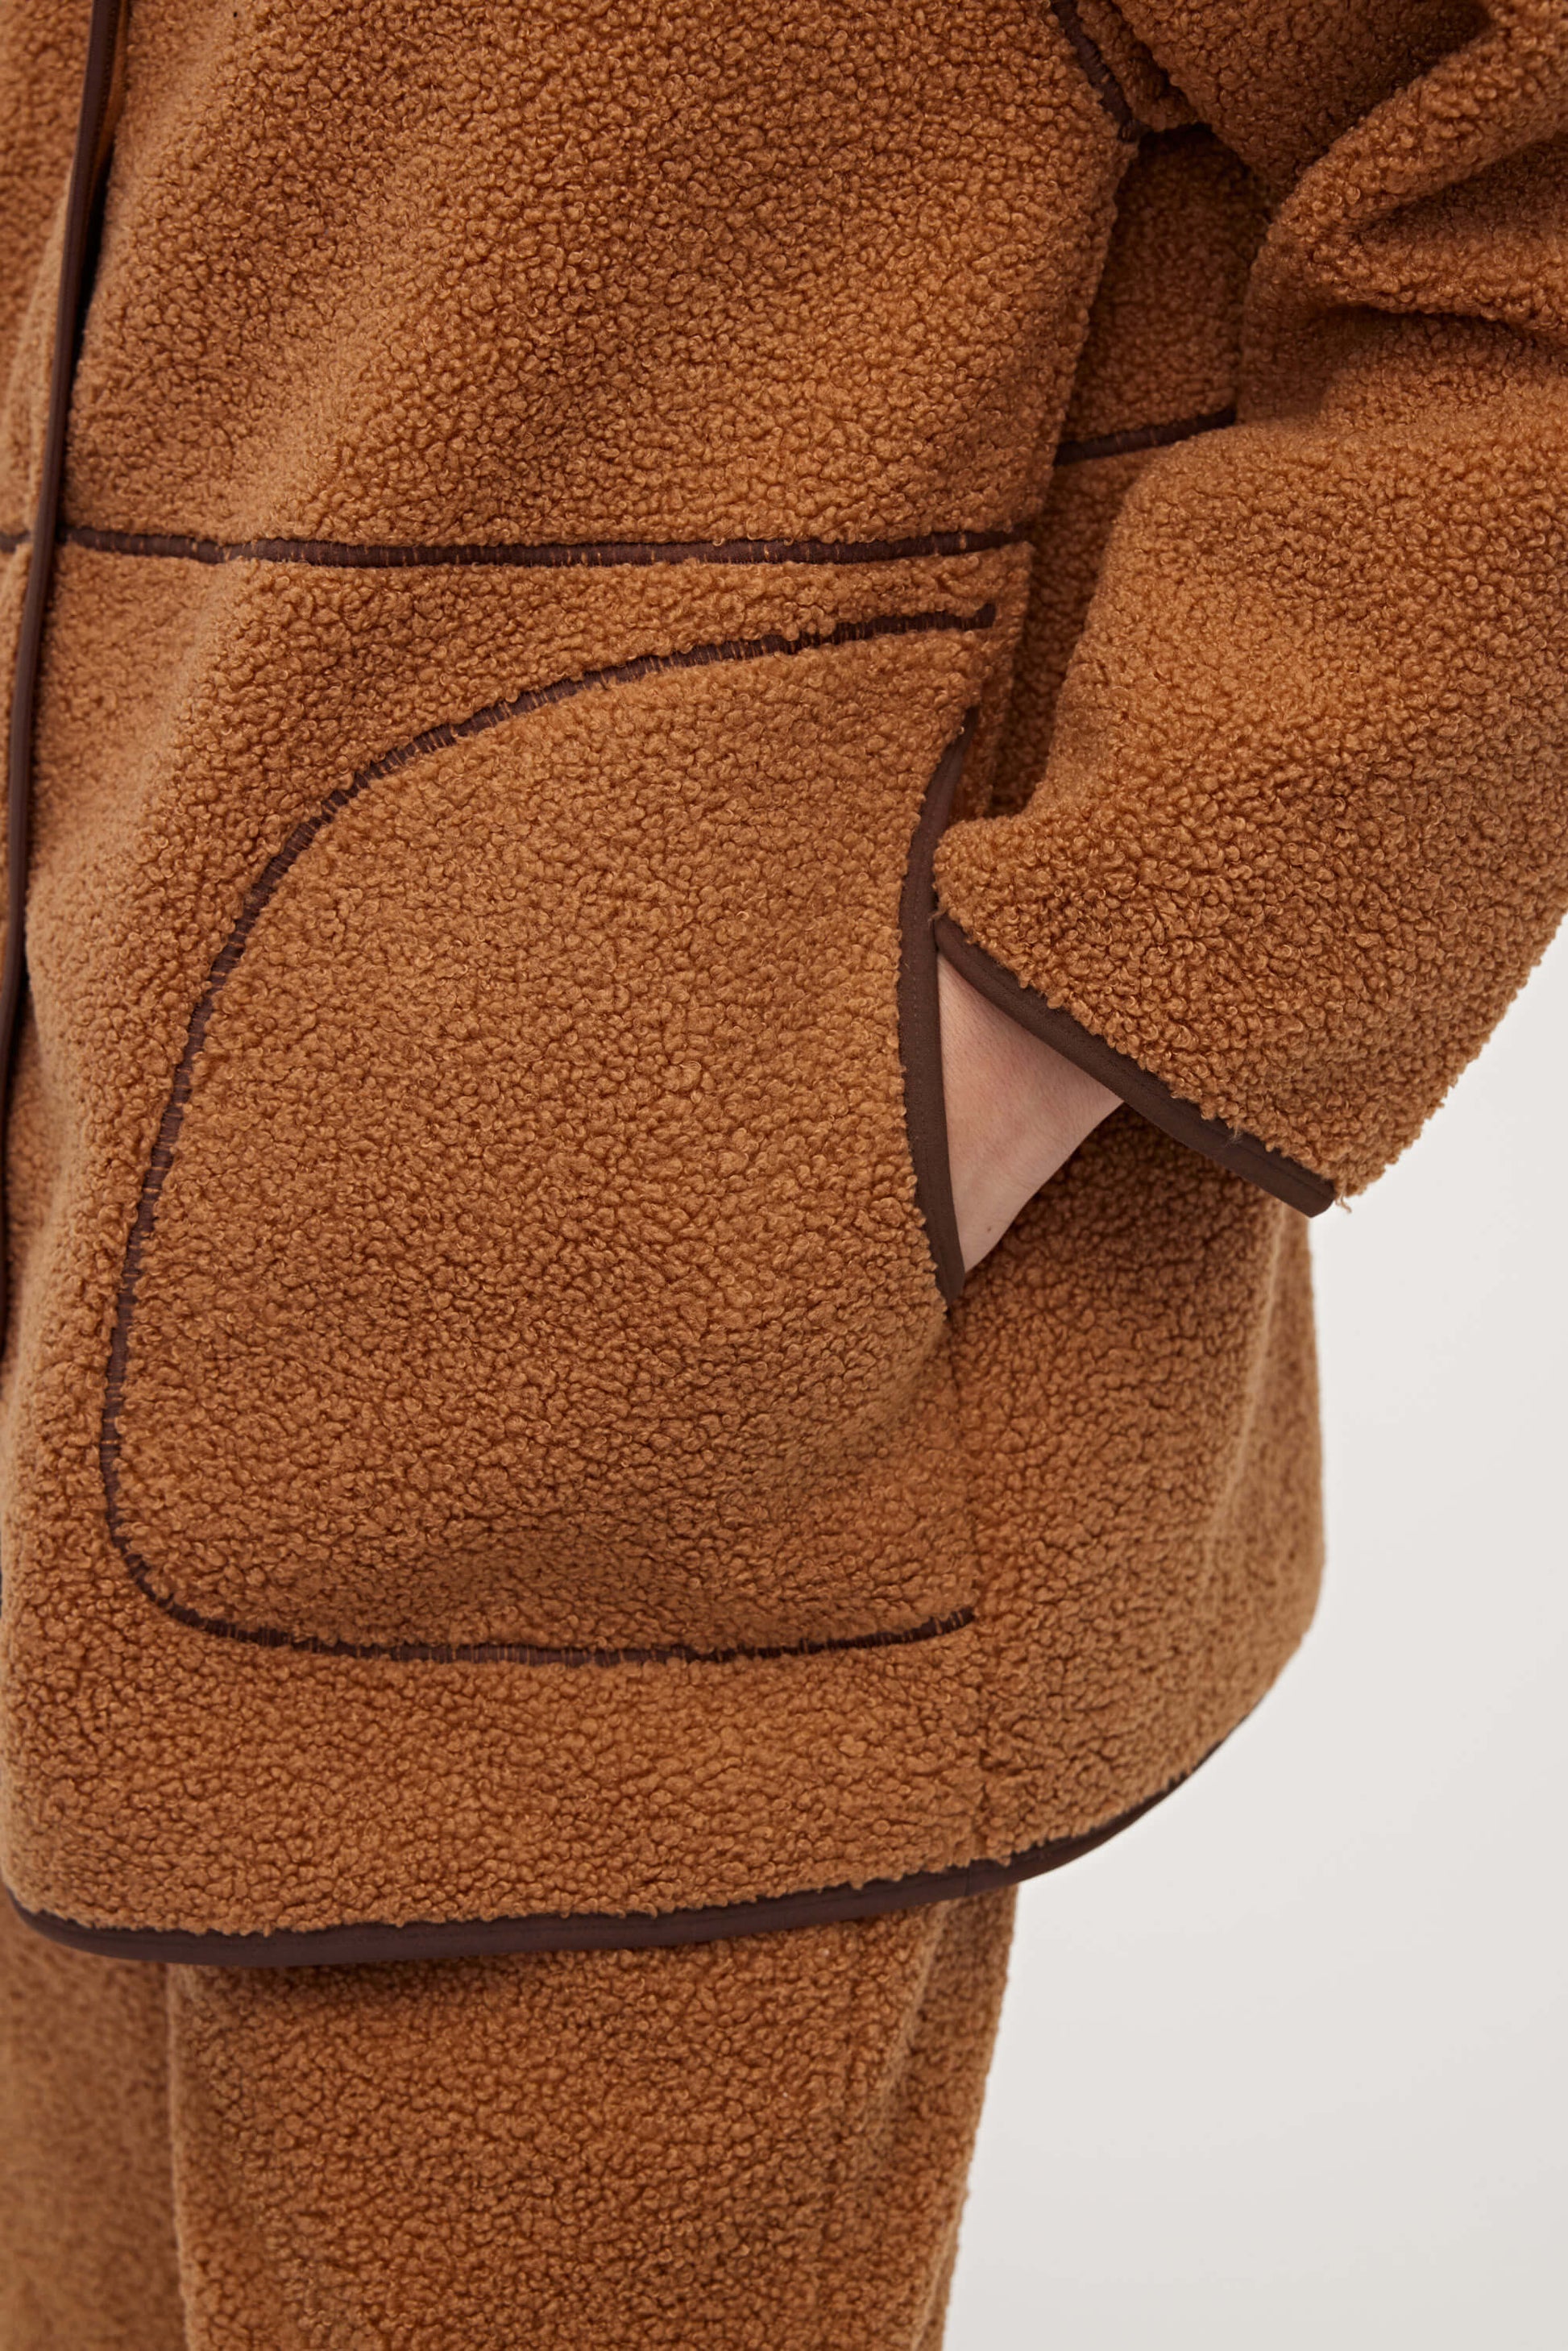 Details about the Teddy Fleece Jacket